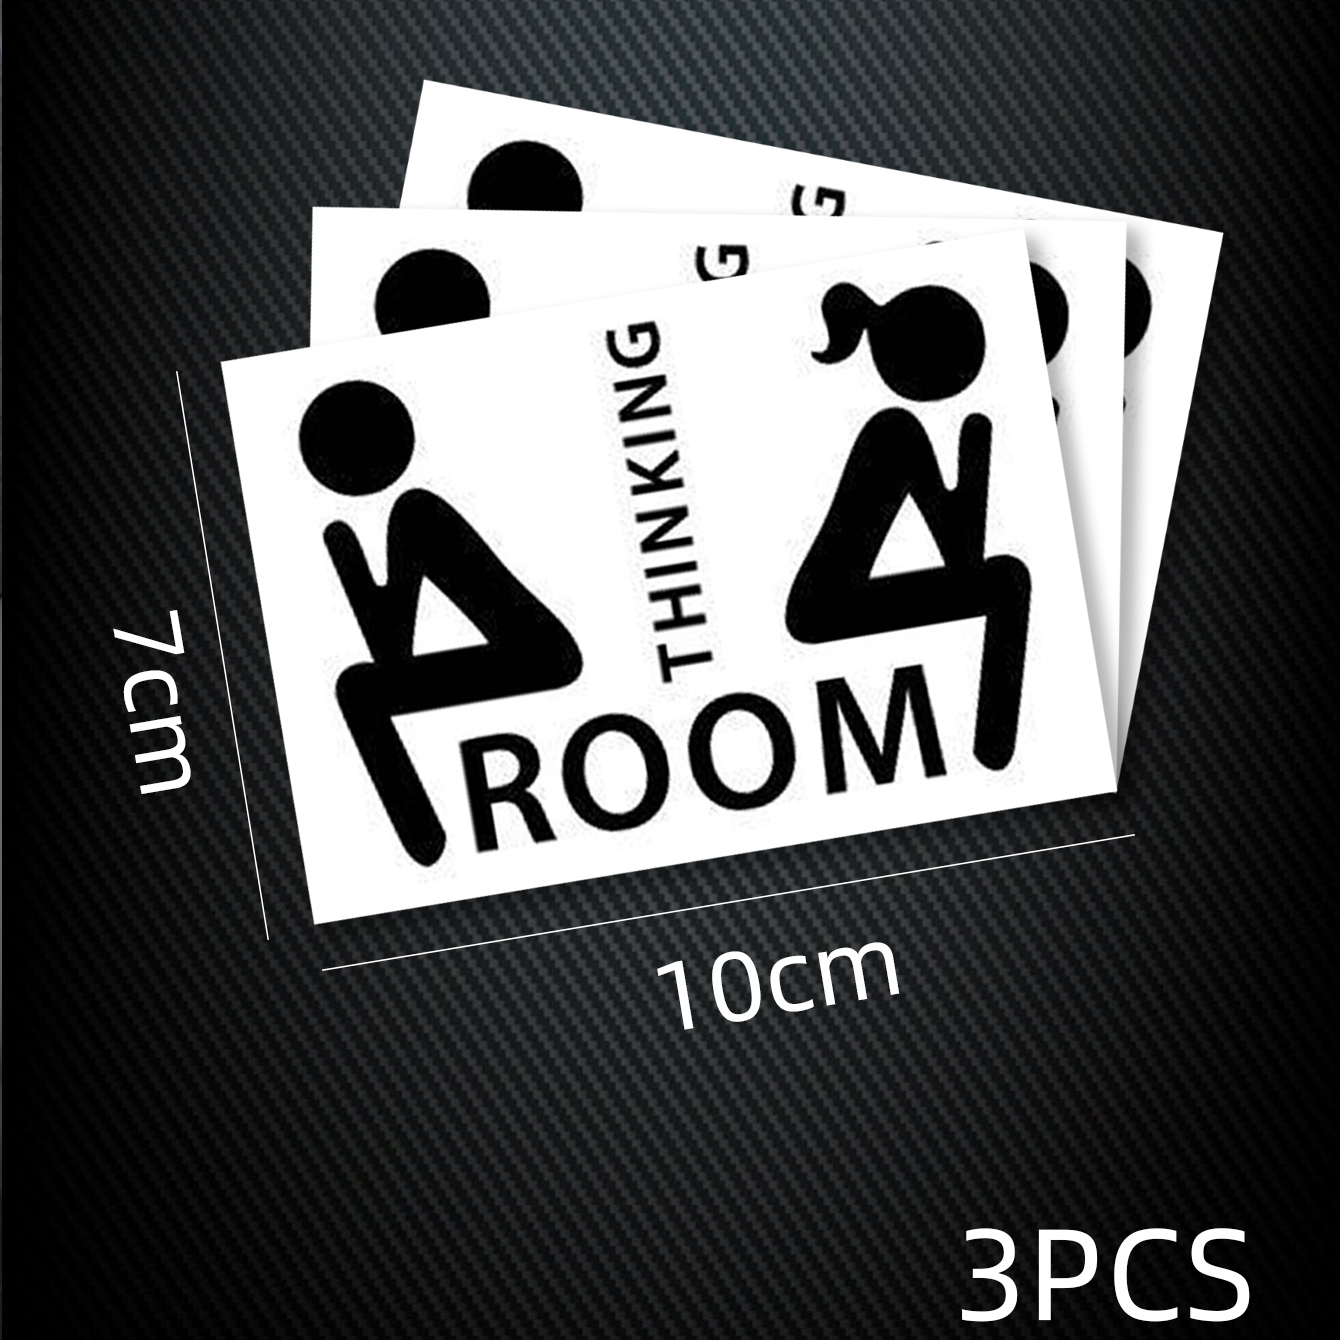 Wholesale 3pcs Thinking Room Toilet Lid Decal display picture 5